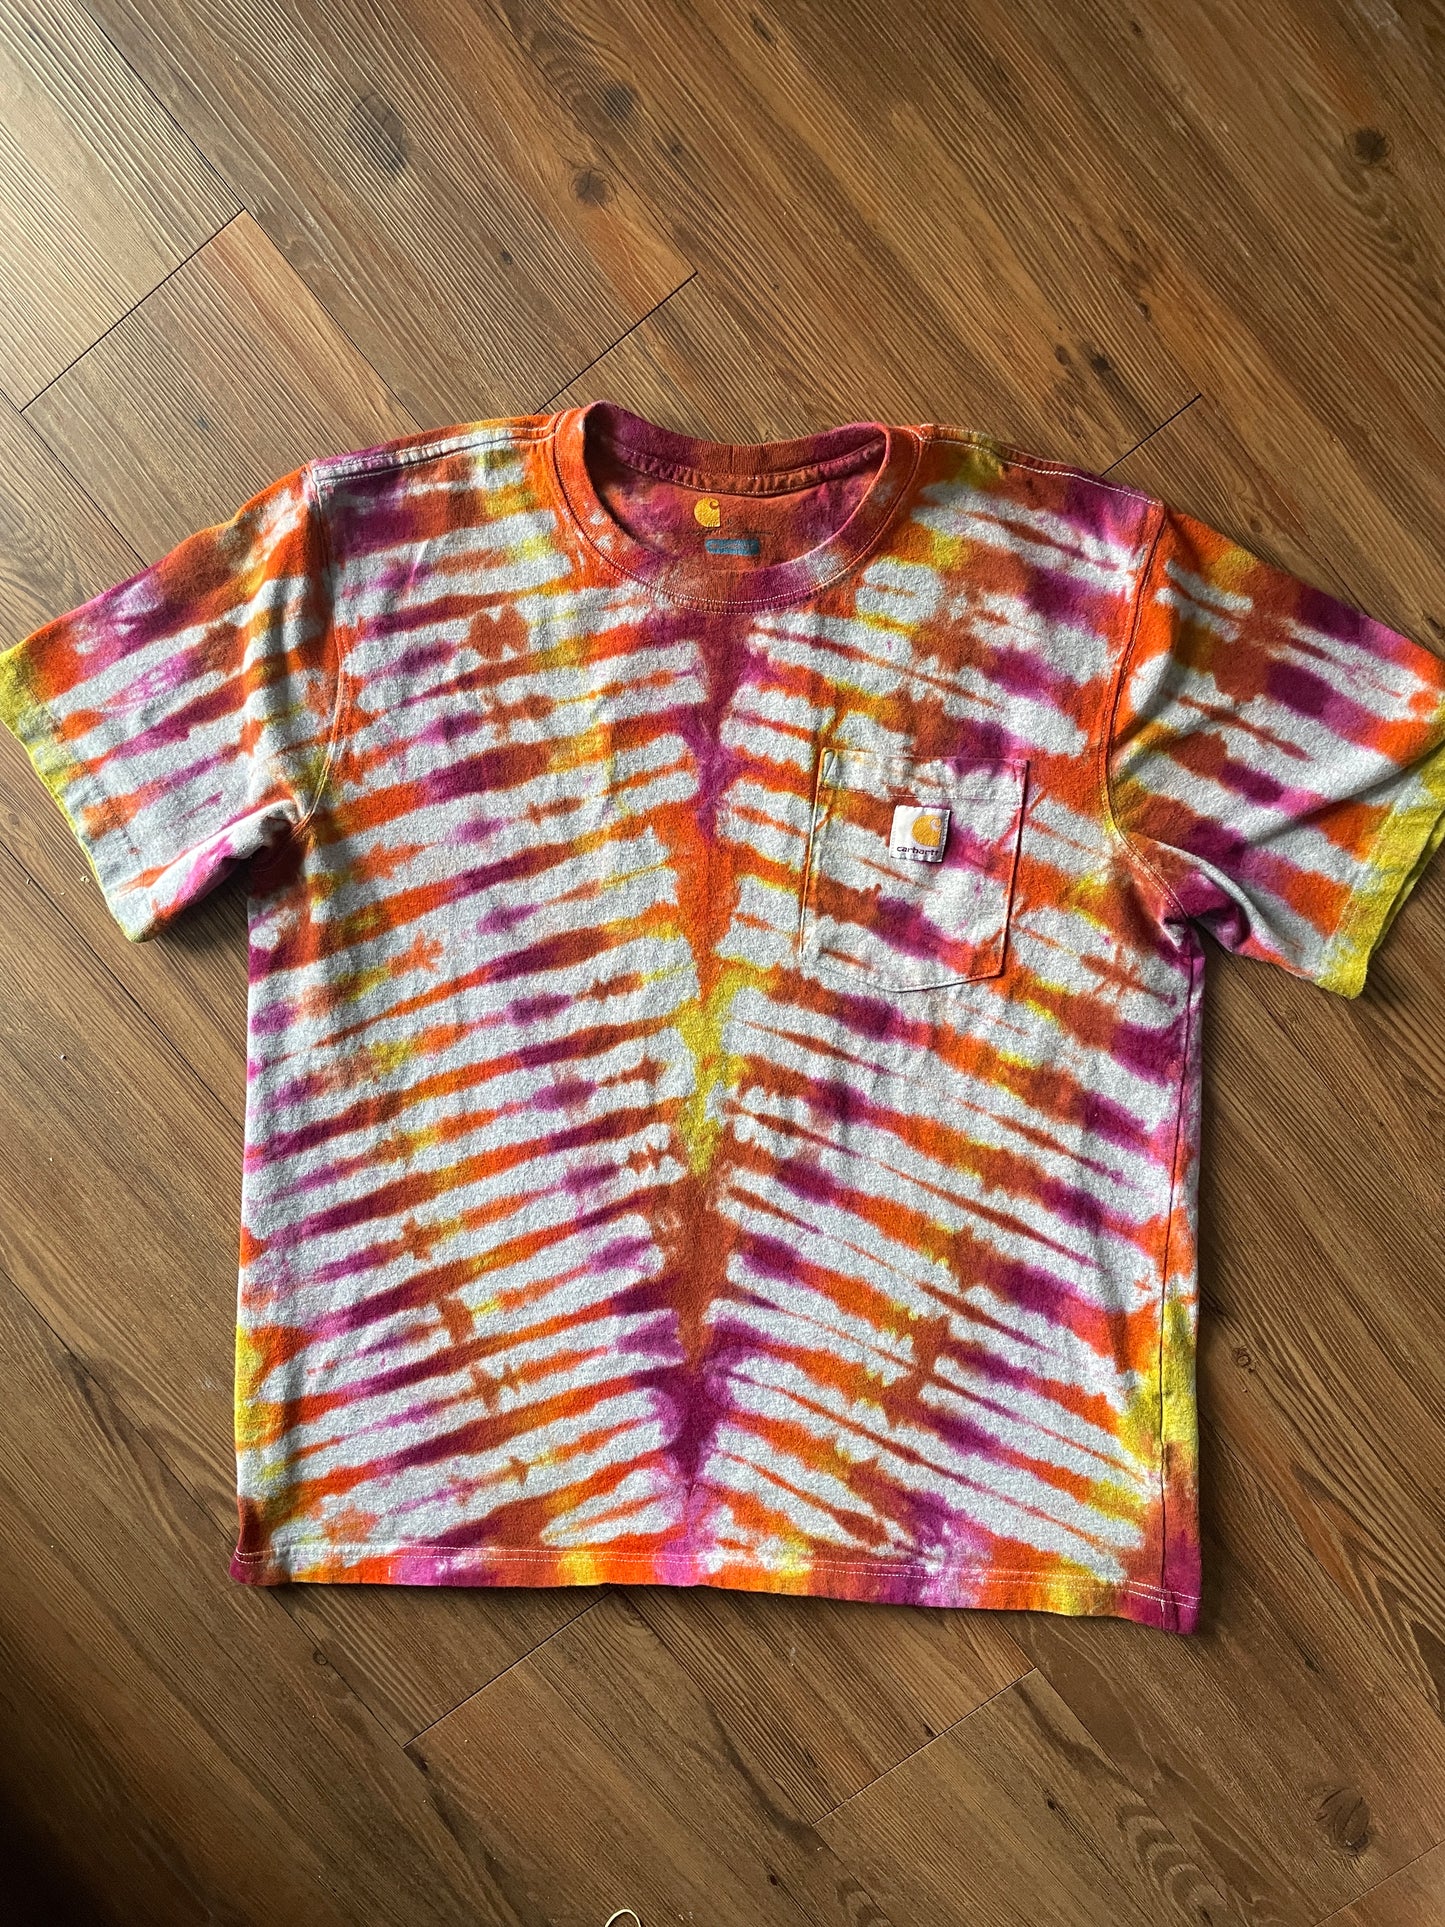 LARGE Men’s Carhartt Relaxed Fit Handmade Tie Dye T-Shirt | One-Of-a-Kind Orange and Pink Short Sleeve